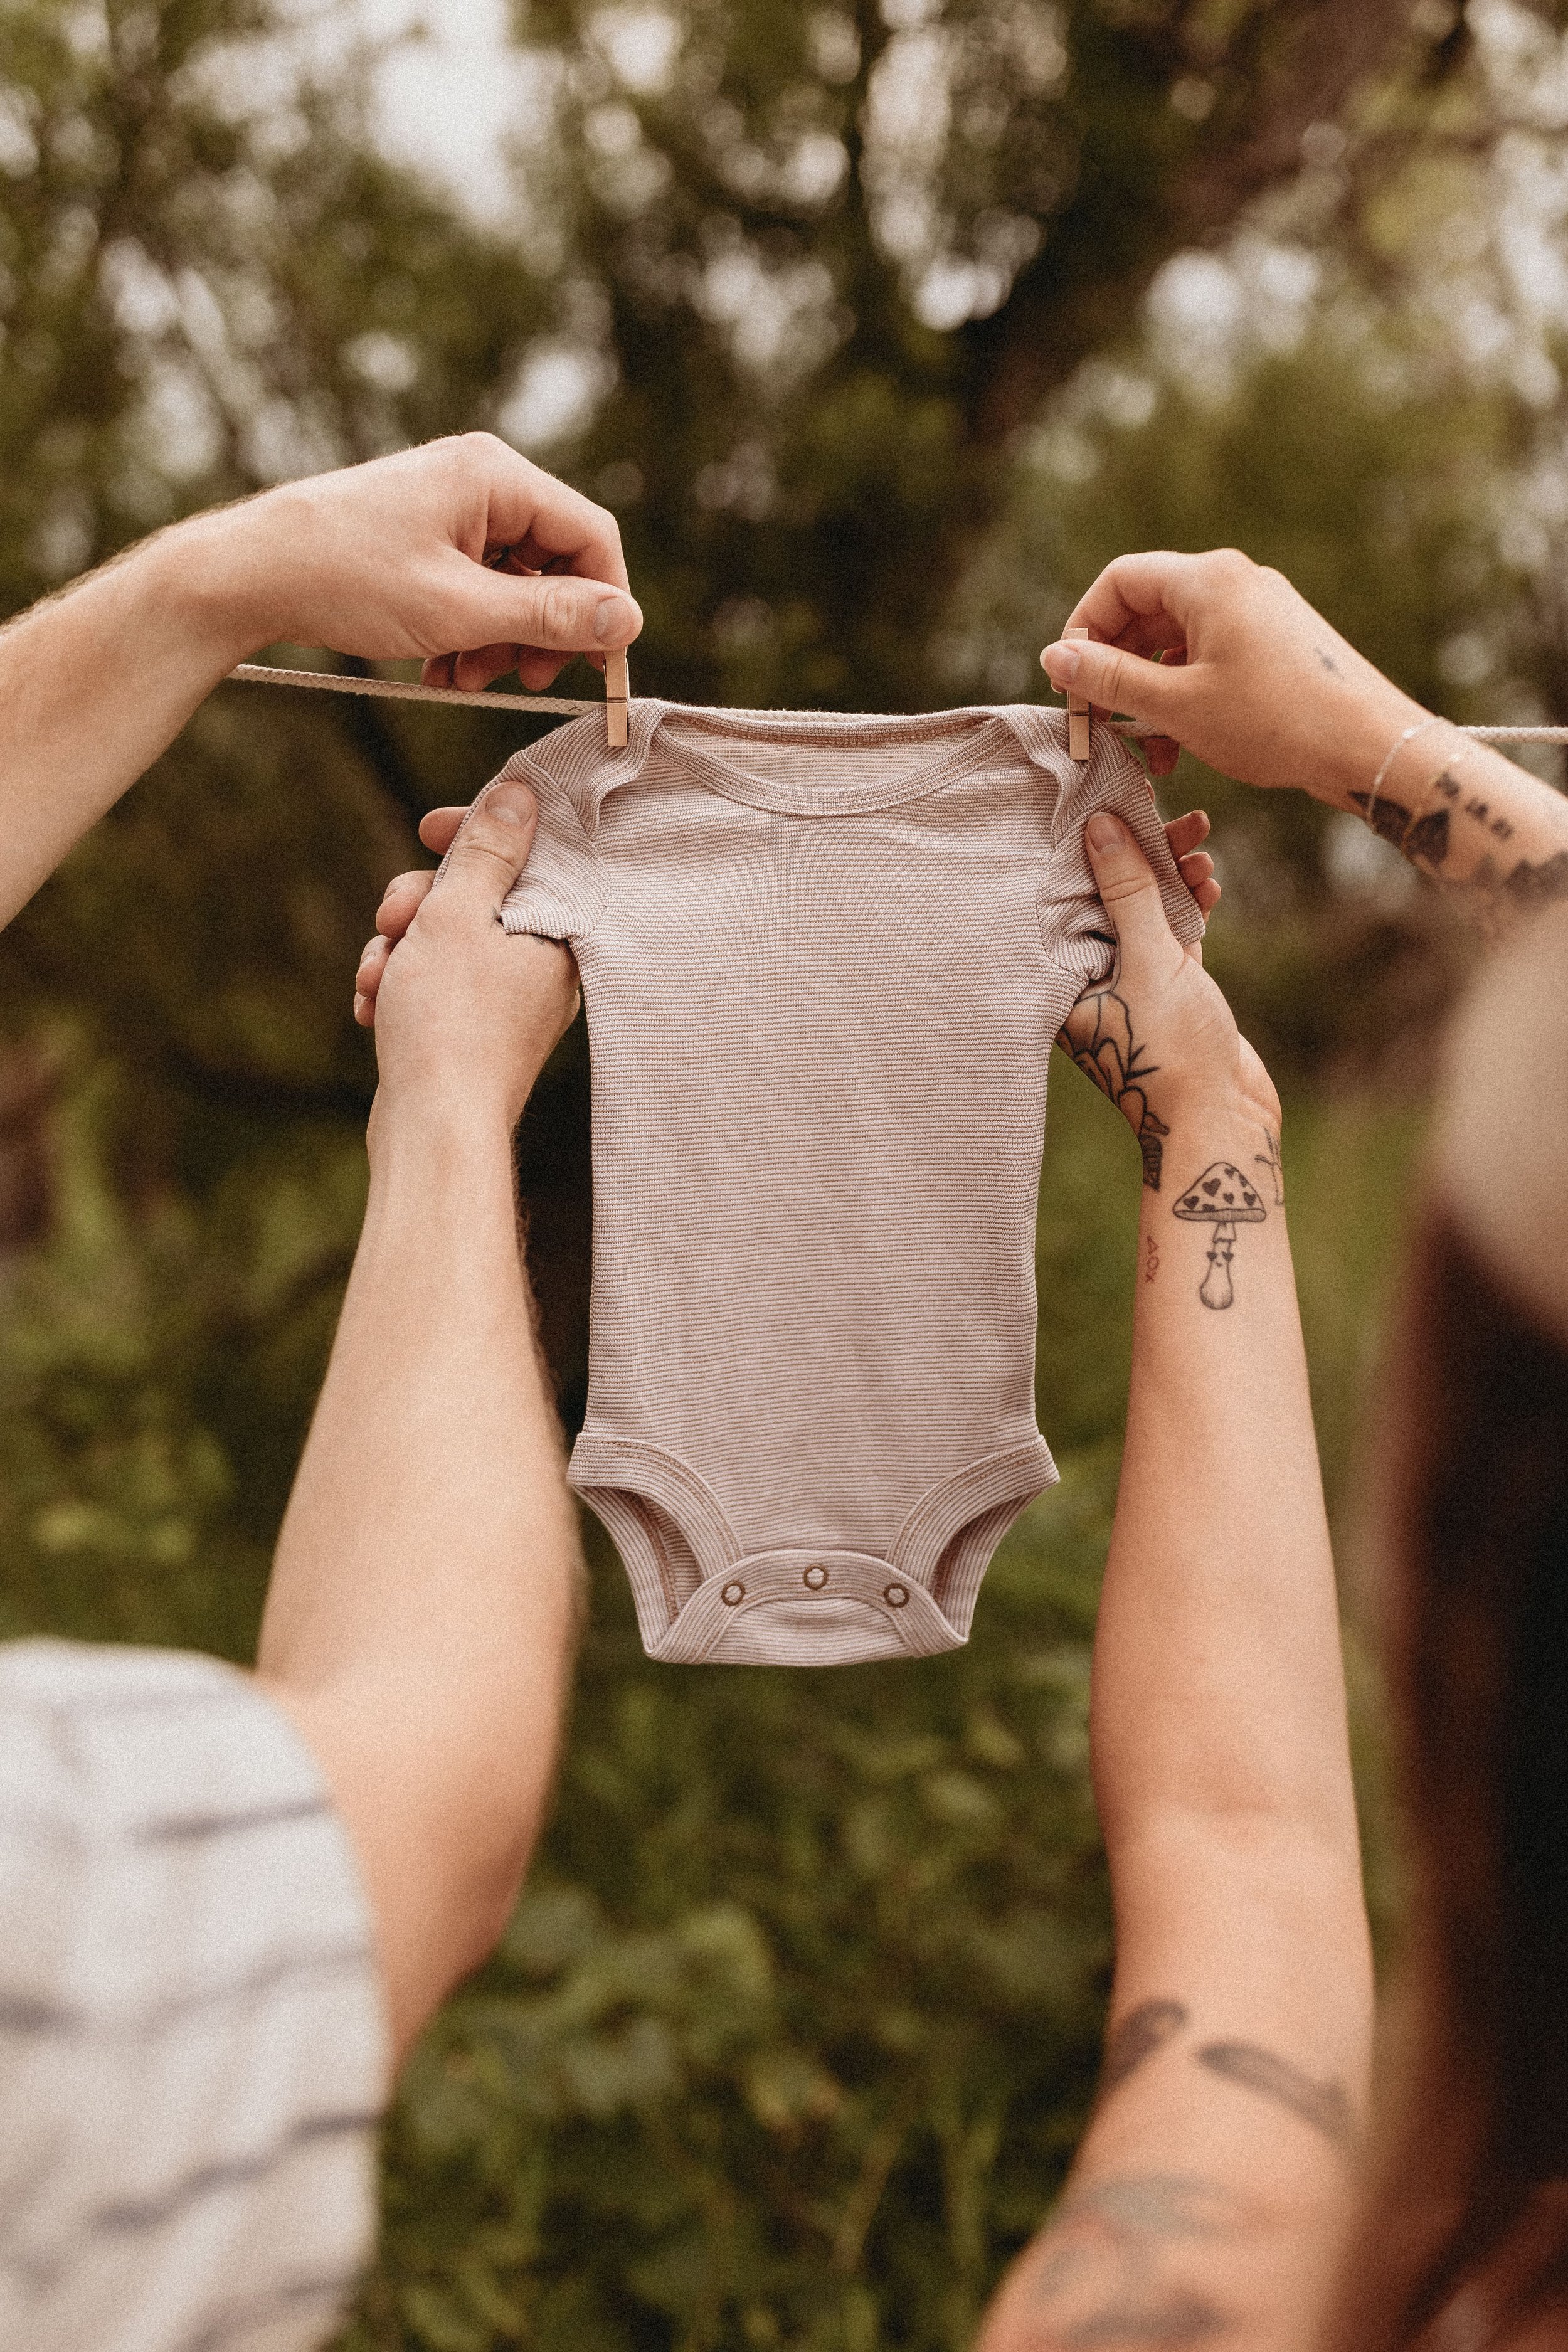  an expecting couple clip a baby onesie on a clothing line during a maternity photoshoot  